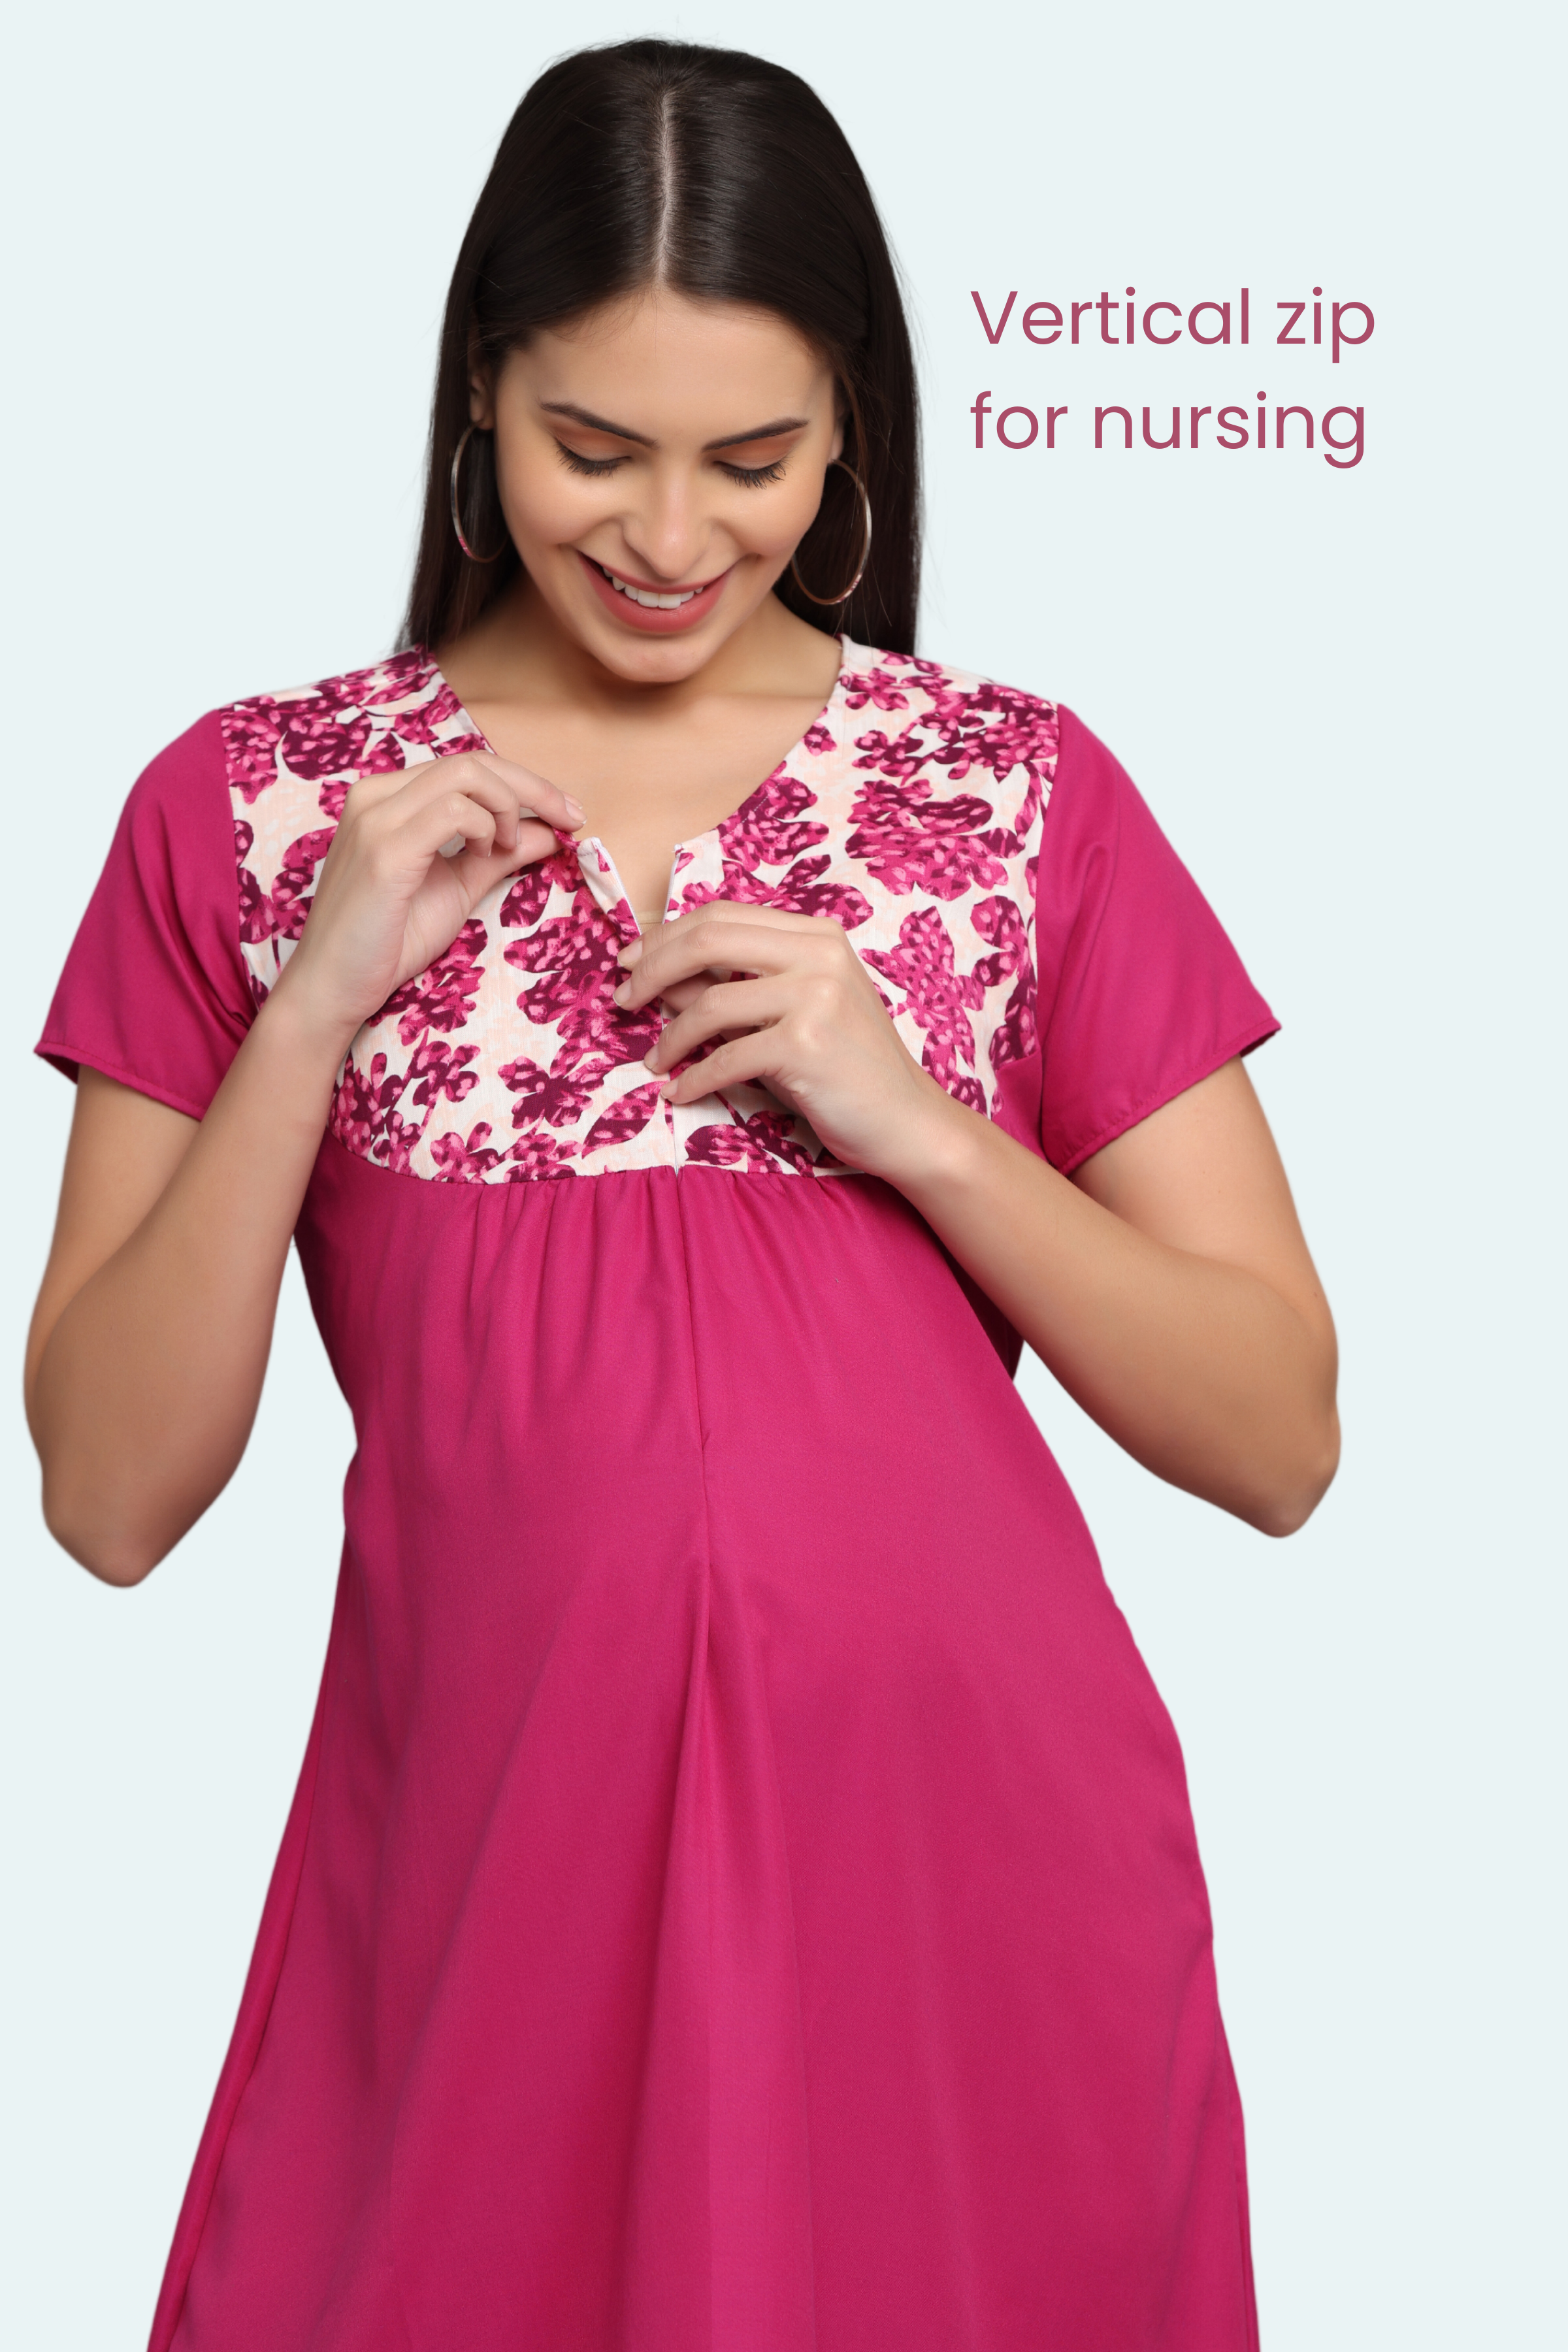 Chic Nursing Dresses That Will Make Breastfeeding And Pumping Easier -  Forbes Vetted